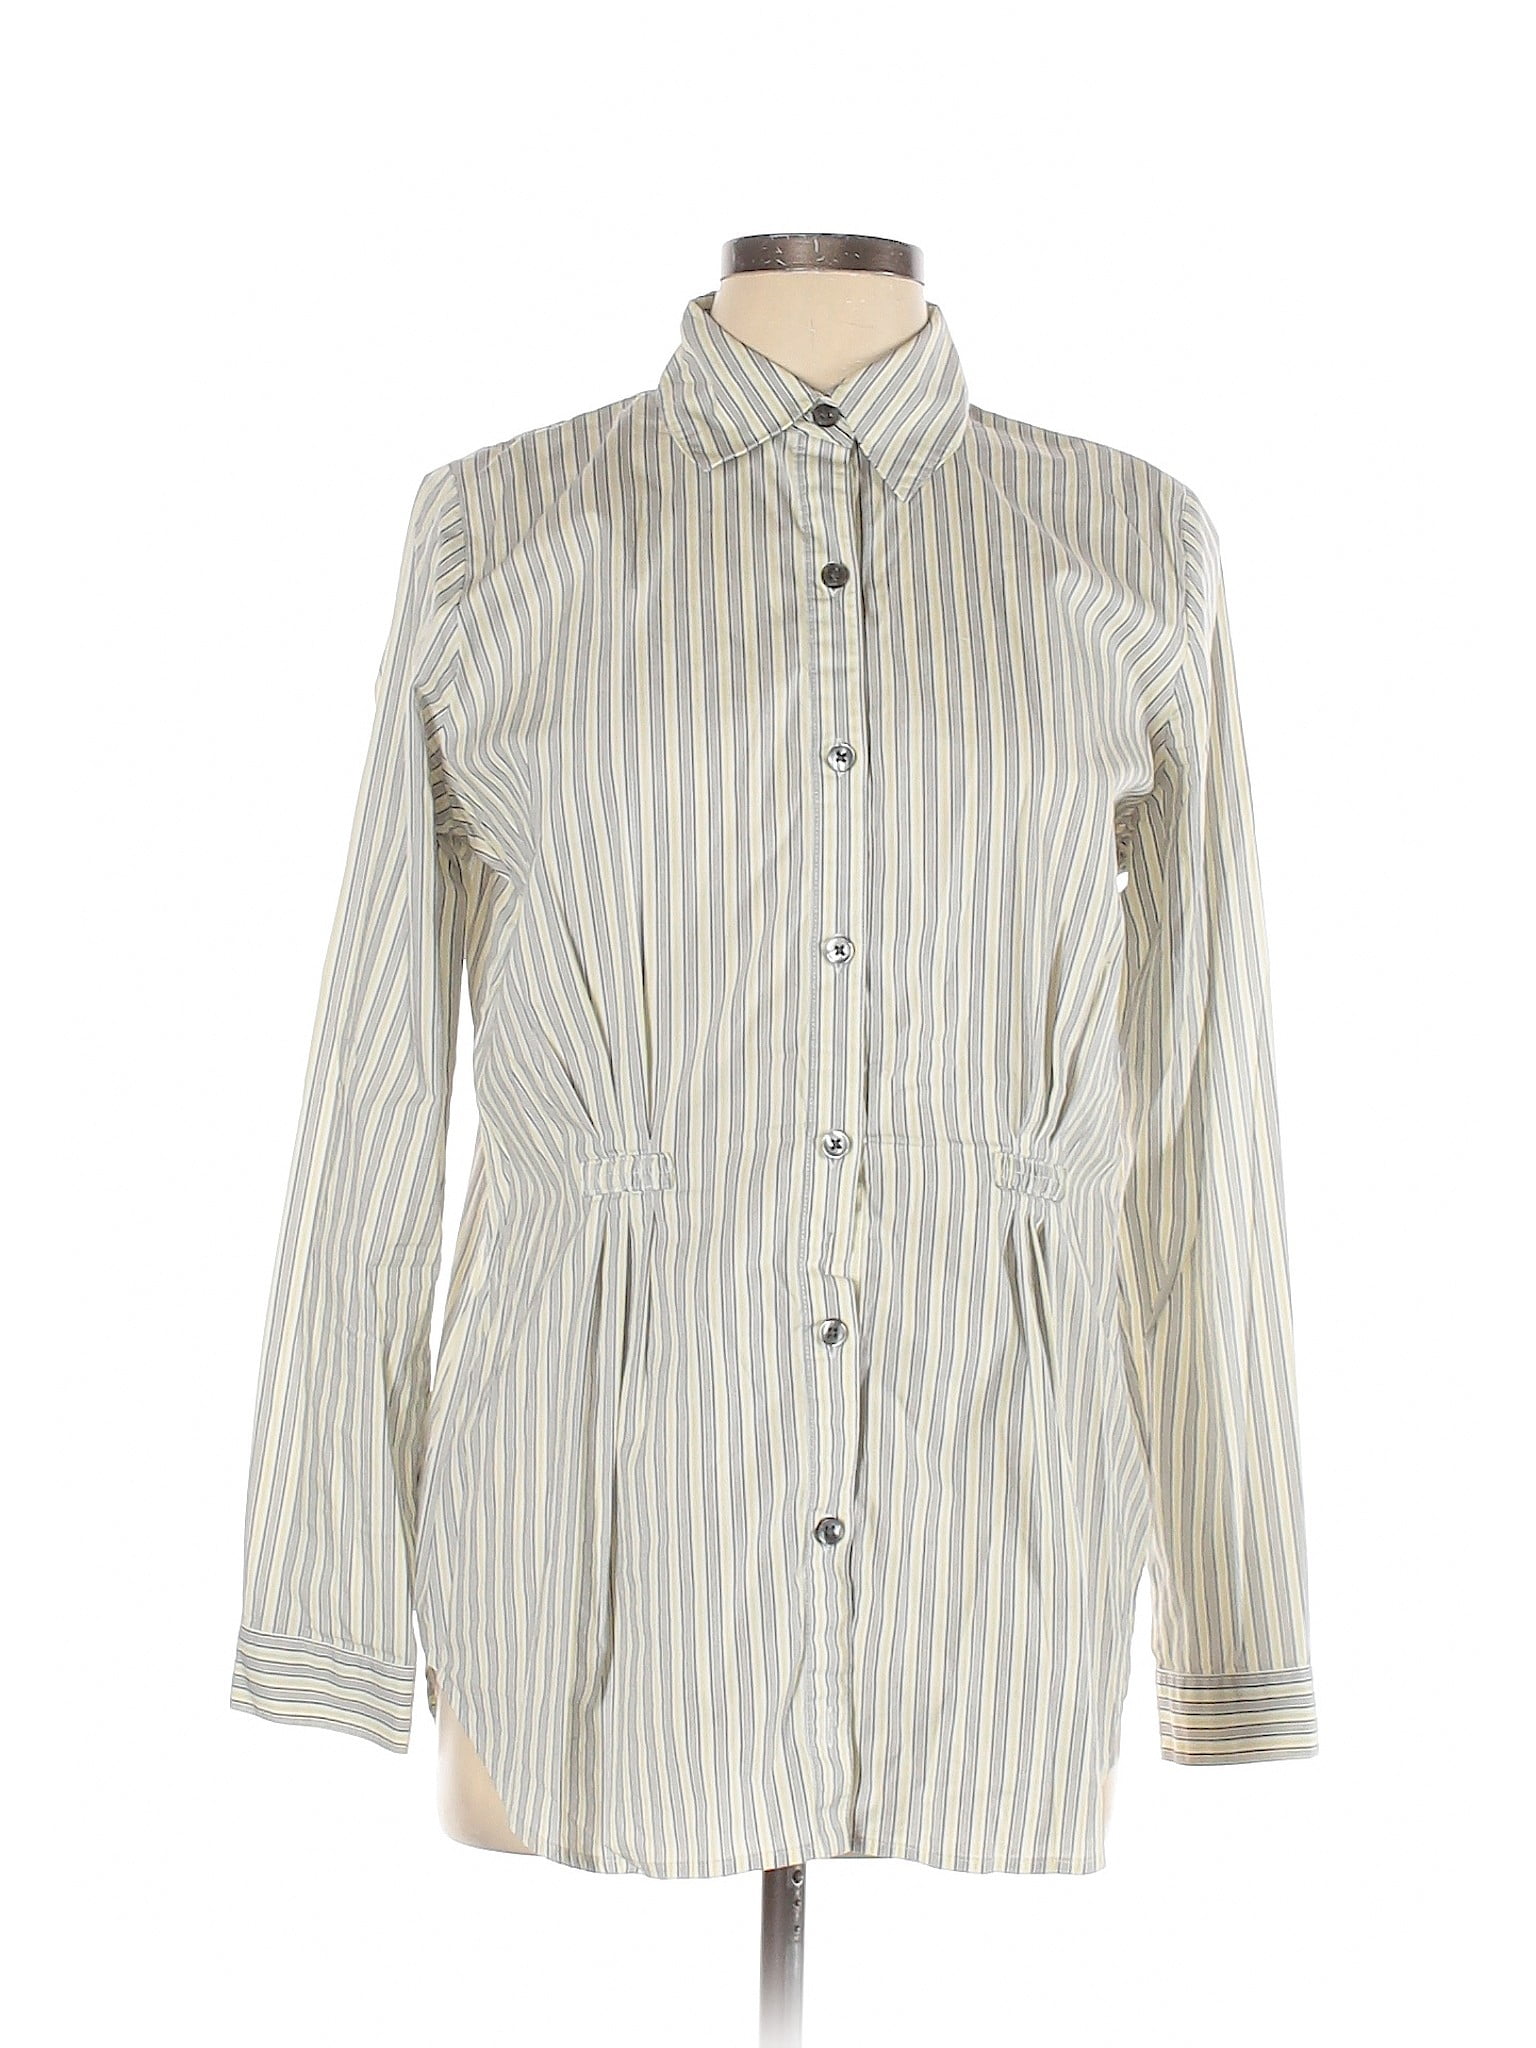 CAbi - Pre-Owned CAbi Women's Size L Long Sleeve Button-Down Shirt ...